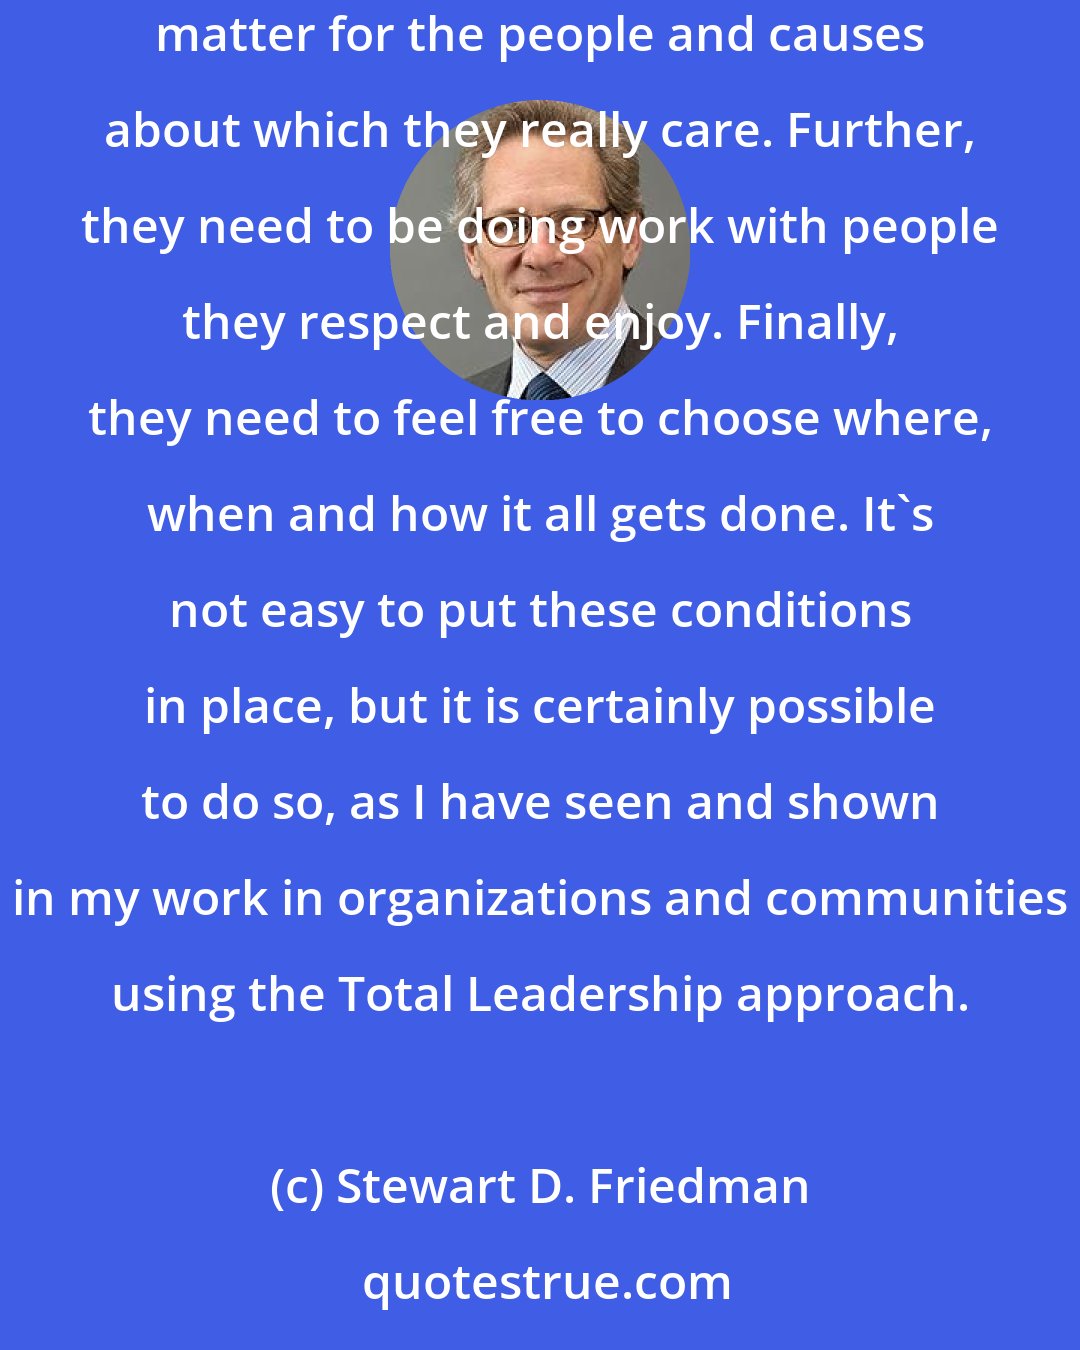 Stewart D. Friedman: My research and practice indicates that people need to be doing work they love and to love the work they do. They need to feel that their efforts matter for the people and causes about which they really care. Further, they need to be doing work with people they respect and enjoy. Finally, they need to feel free to choose where, when and how it all gets done. It's not easy to put these conditions in place, but it is certainly possible to do so, as I have seen and shown in my work in organizations and communities using the Total Leadership approach.